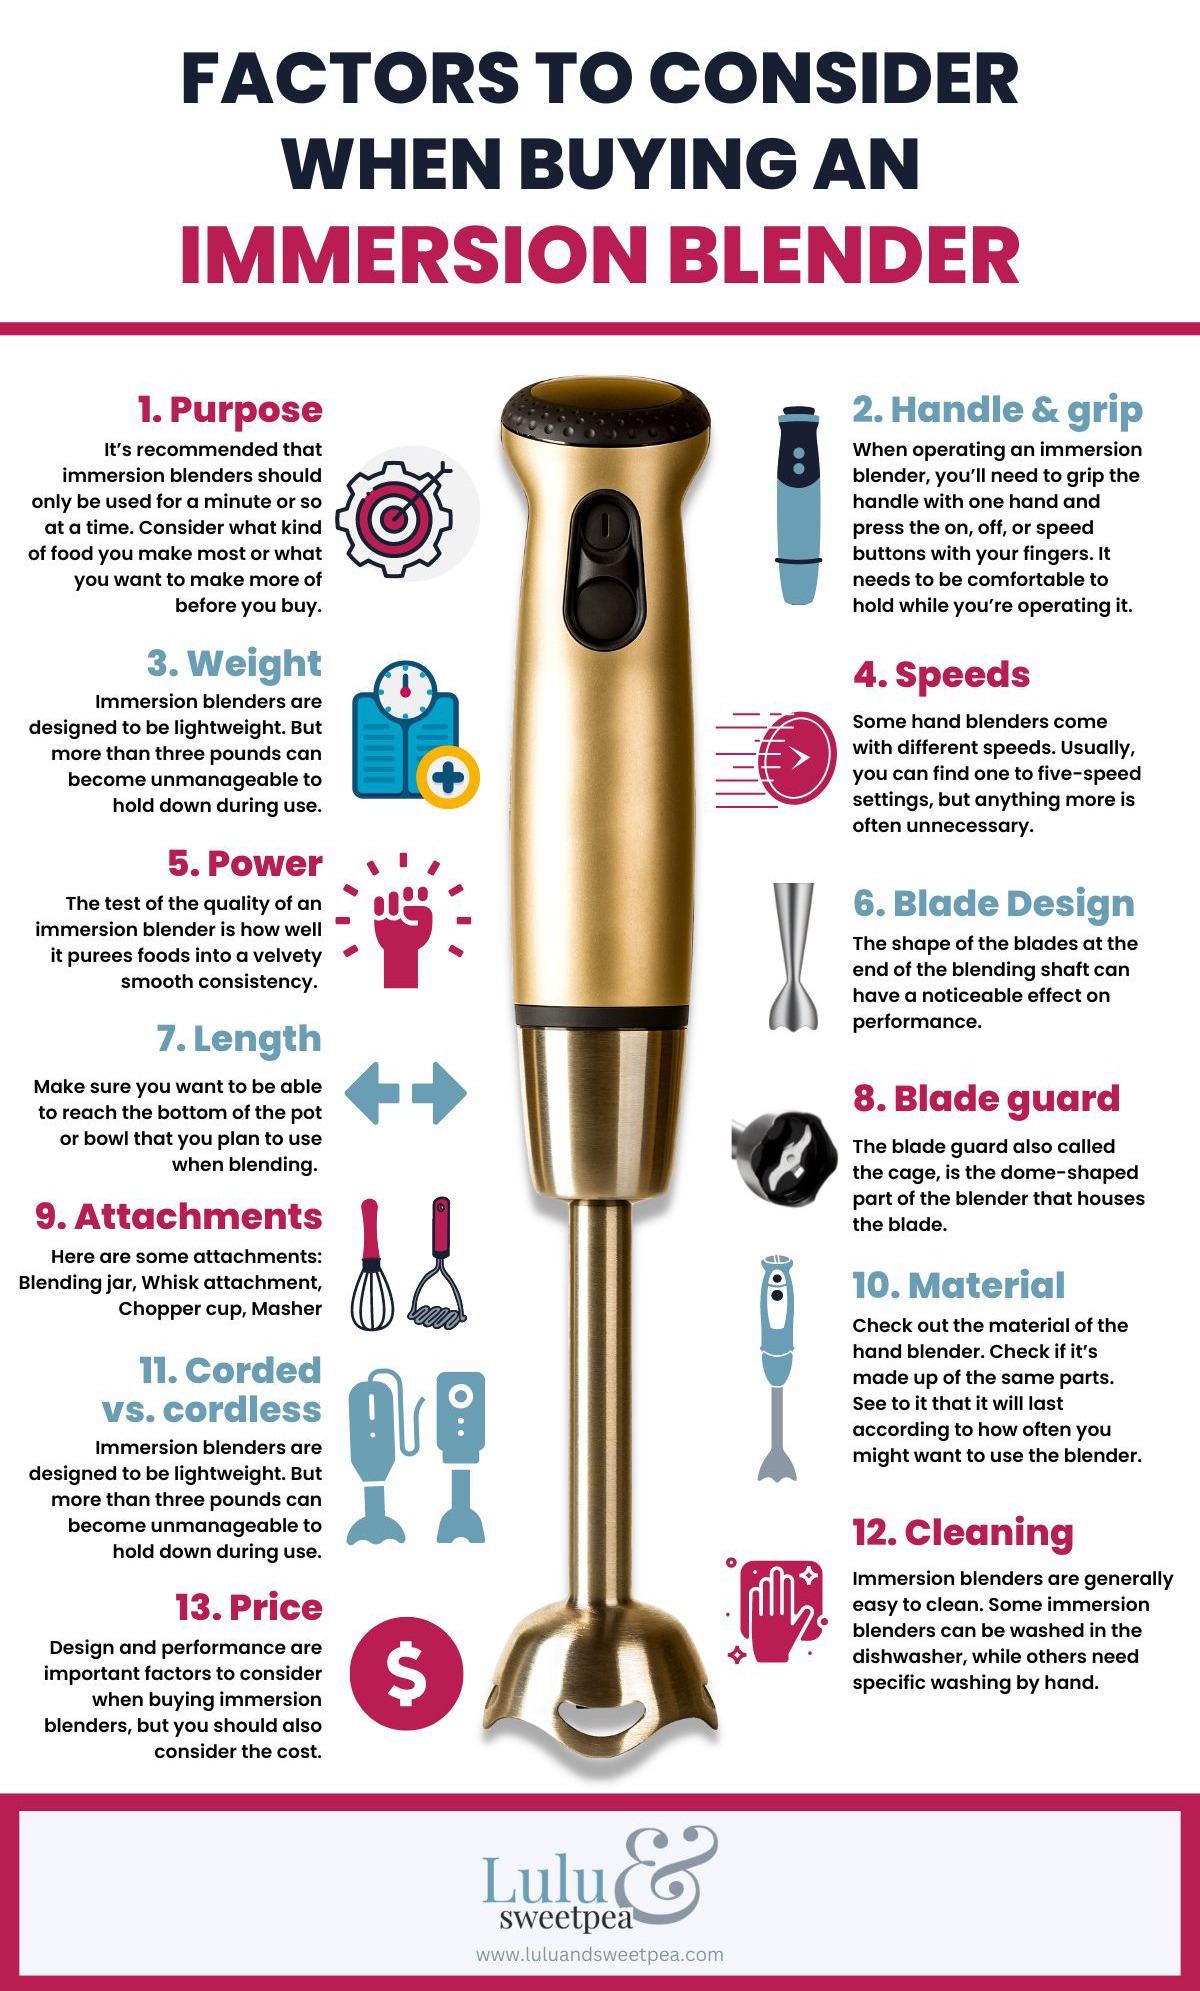  Things to Consider When Buying an Immersion Blender